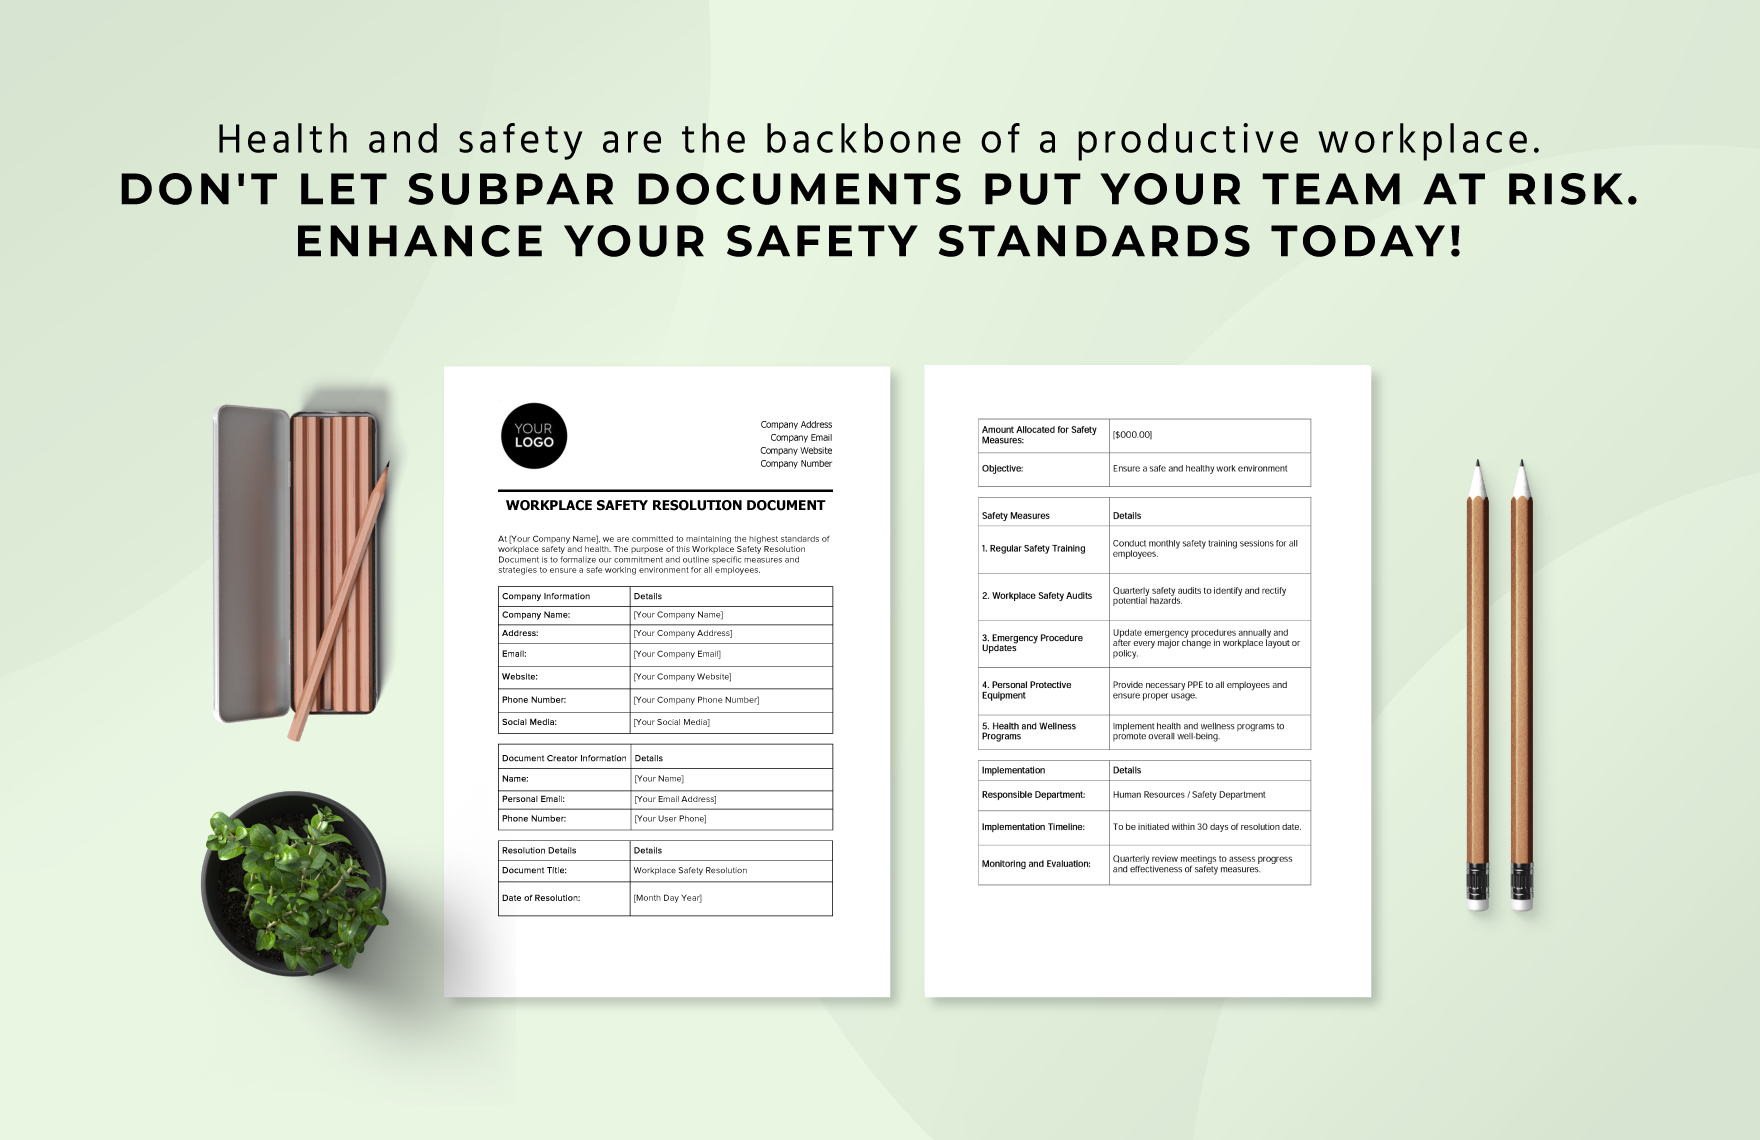 Workplace Safety Resolution Document Template